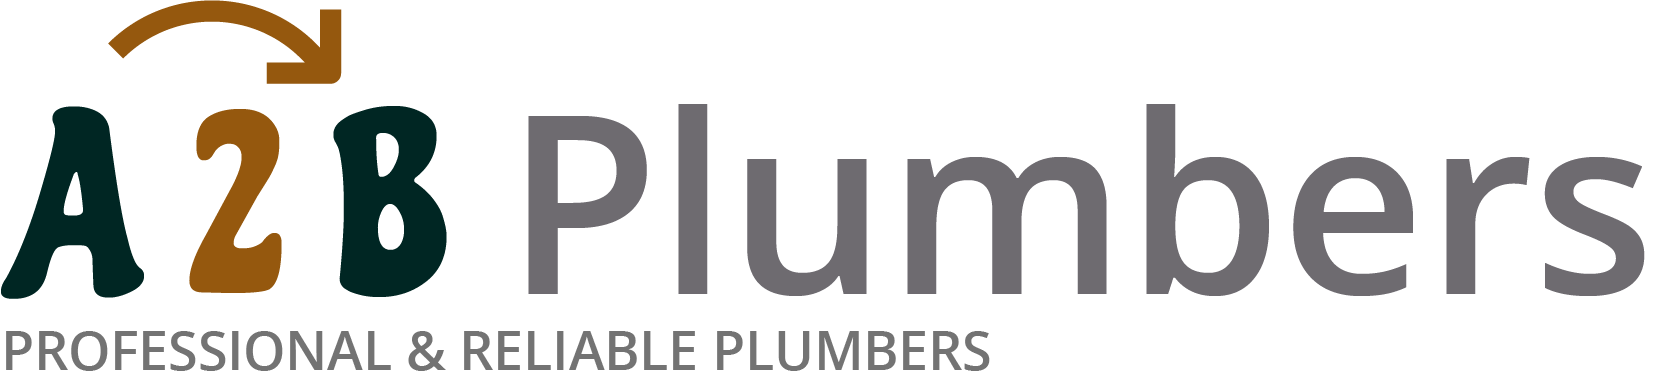 If you need a boiler installed, a radiator repaired or a leaking tap fixed, call us now - we provide services for properties in Boughton and the local area.